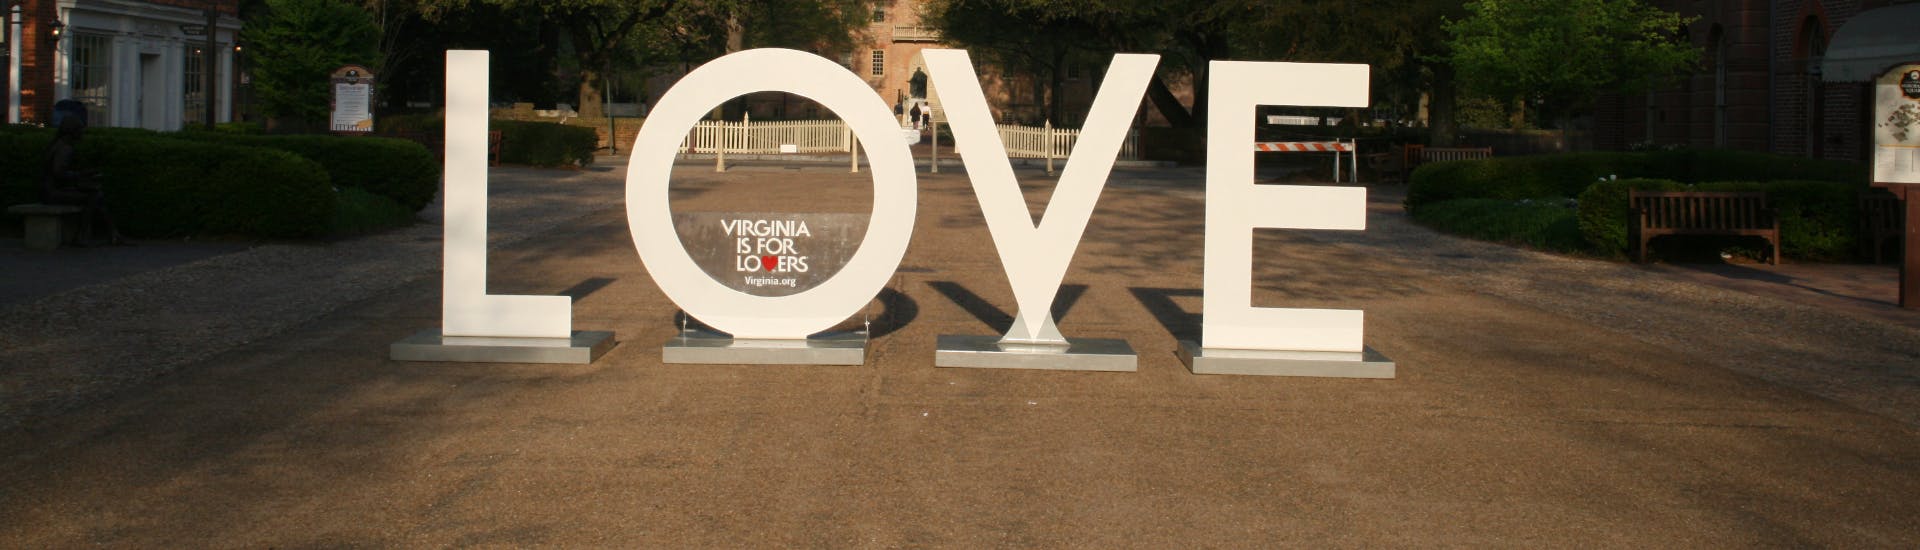 Large letters that spell out L O V E with Virginia is for Lovers in the middle of the O with a heart.